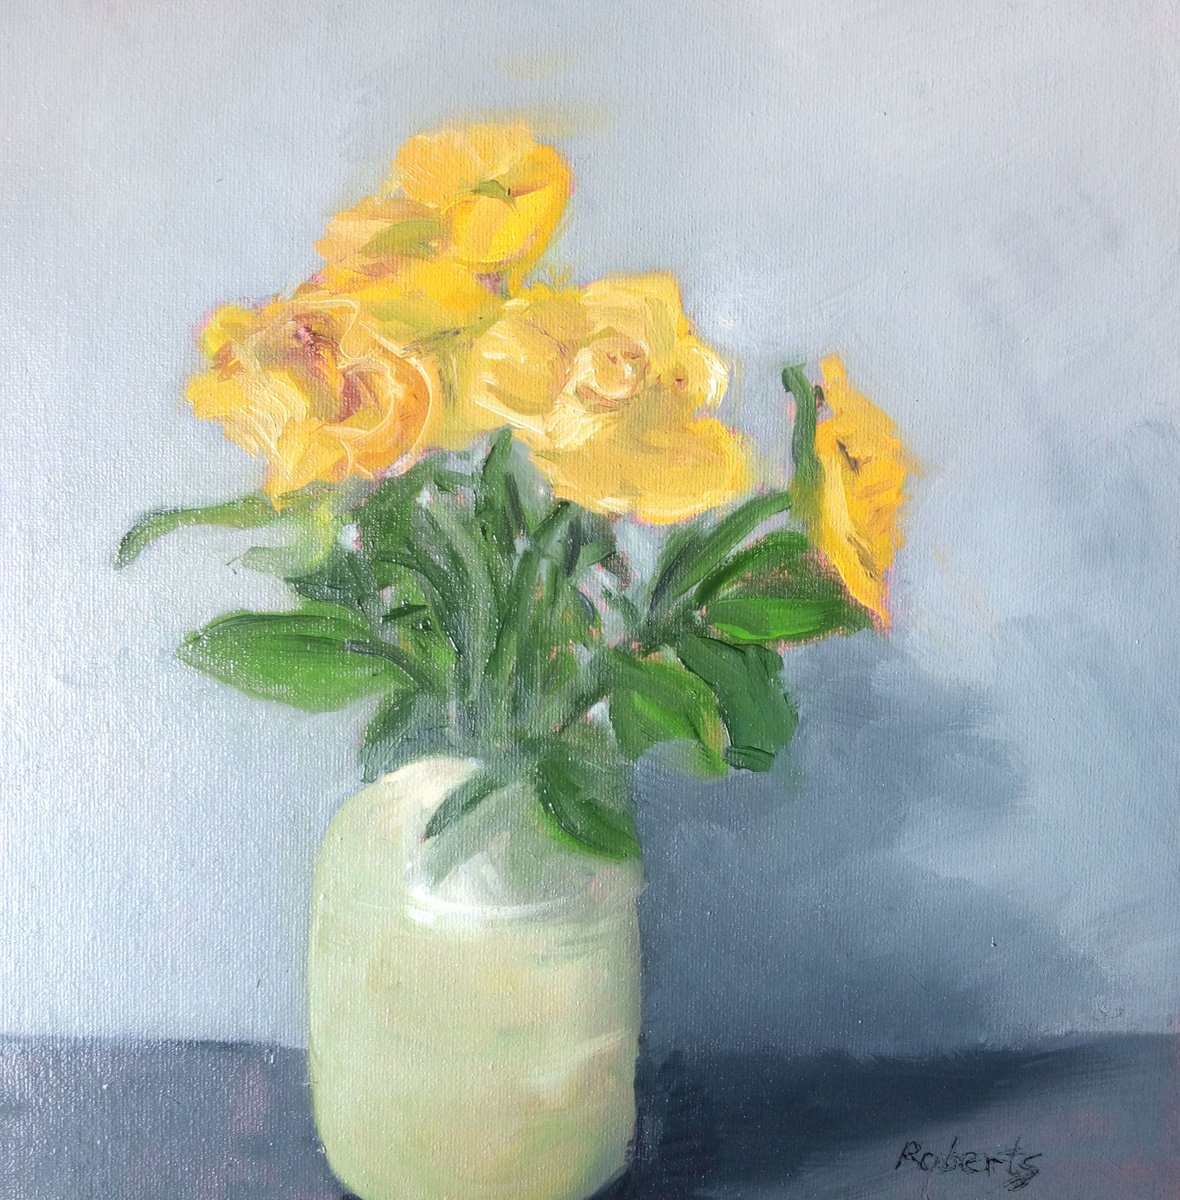 STILL LIFE WITH SPRING FLOWERS by Rosalind Roberts